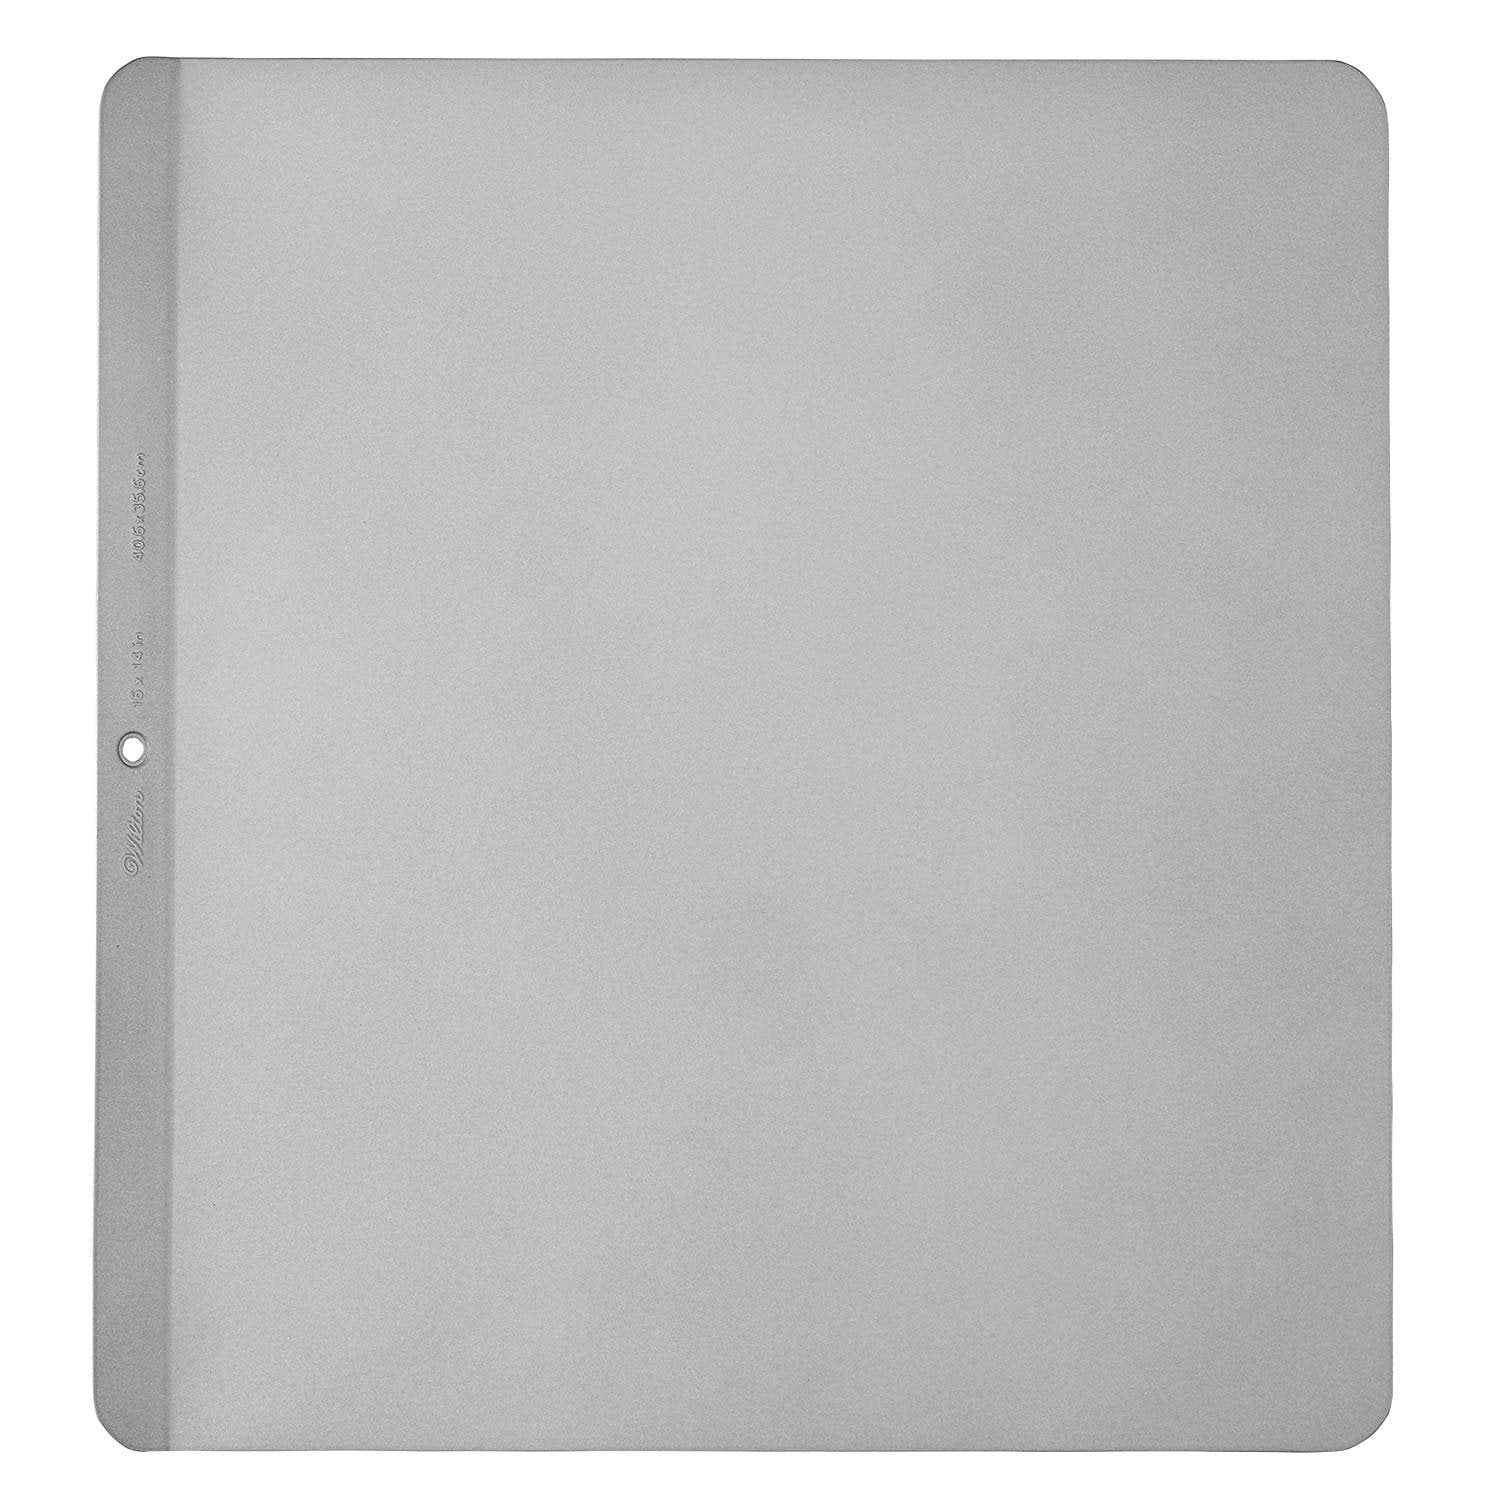 Wilton Perfect Results 16 x 14 Air Insulated Cookie Sheet